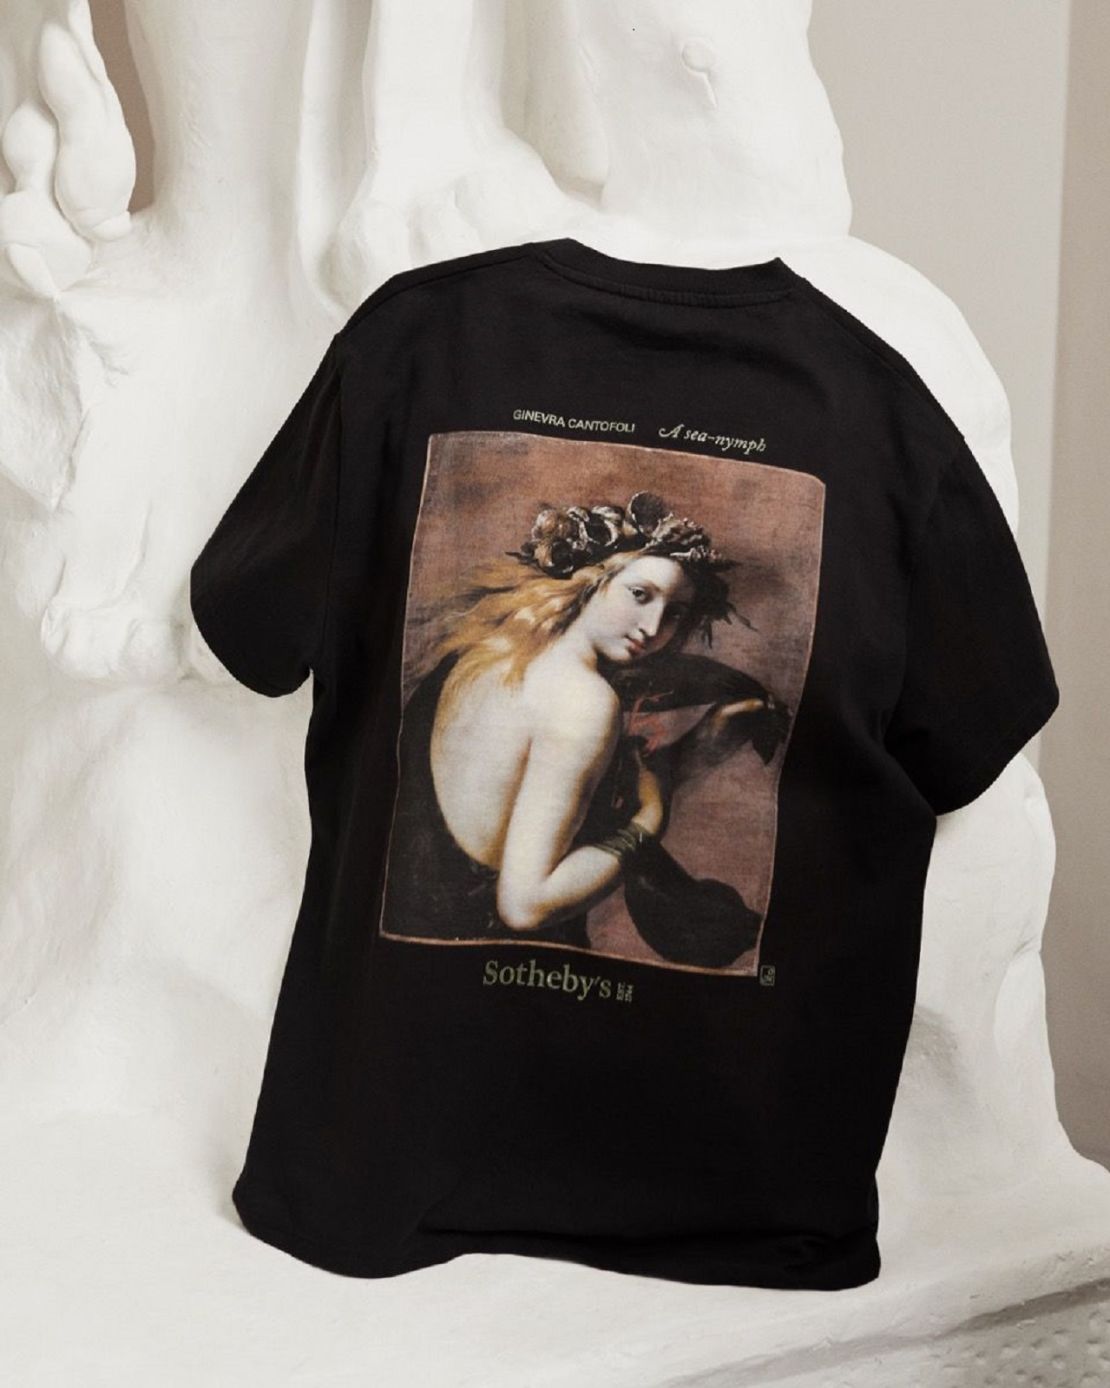 A result of a Sotheby's and Highsnobiety collaboration. 